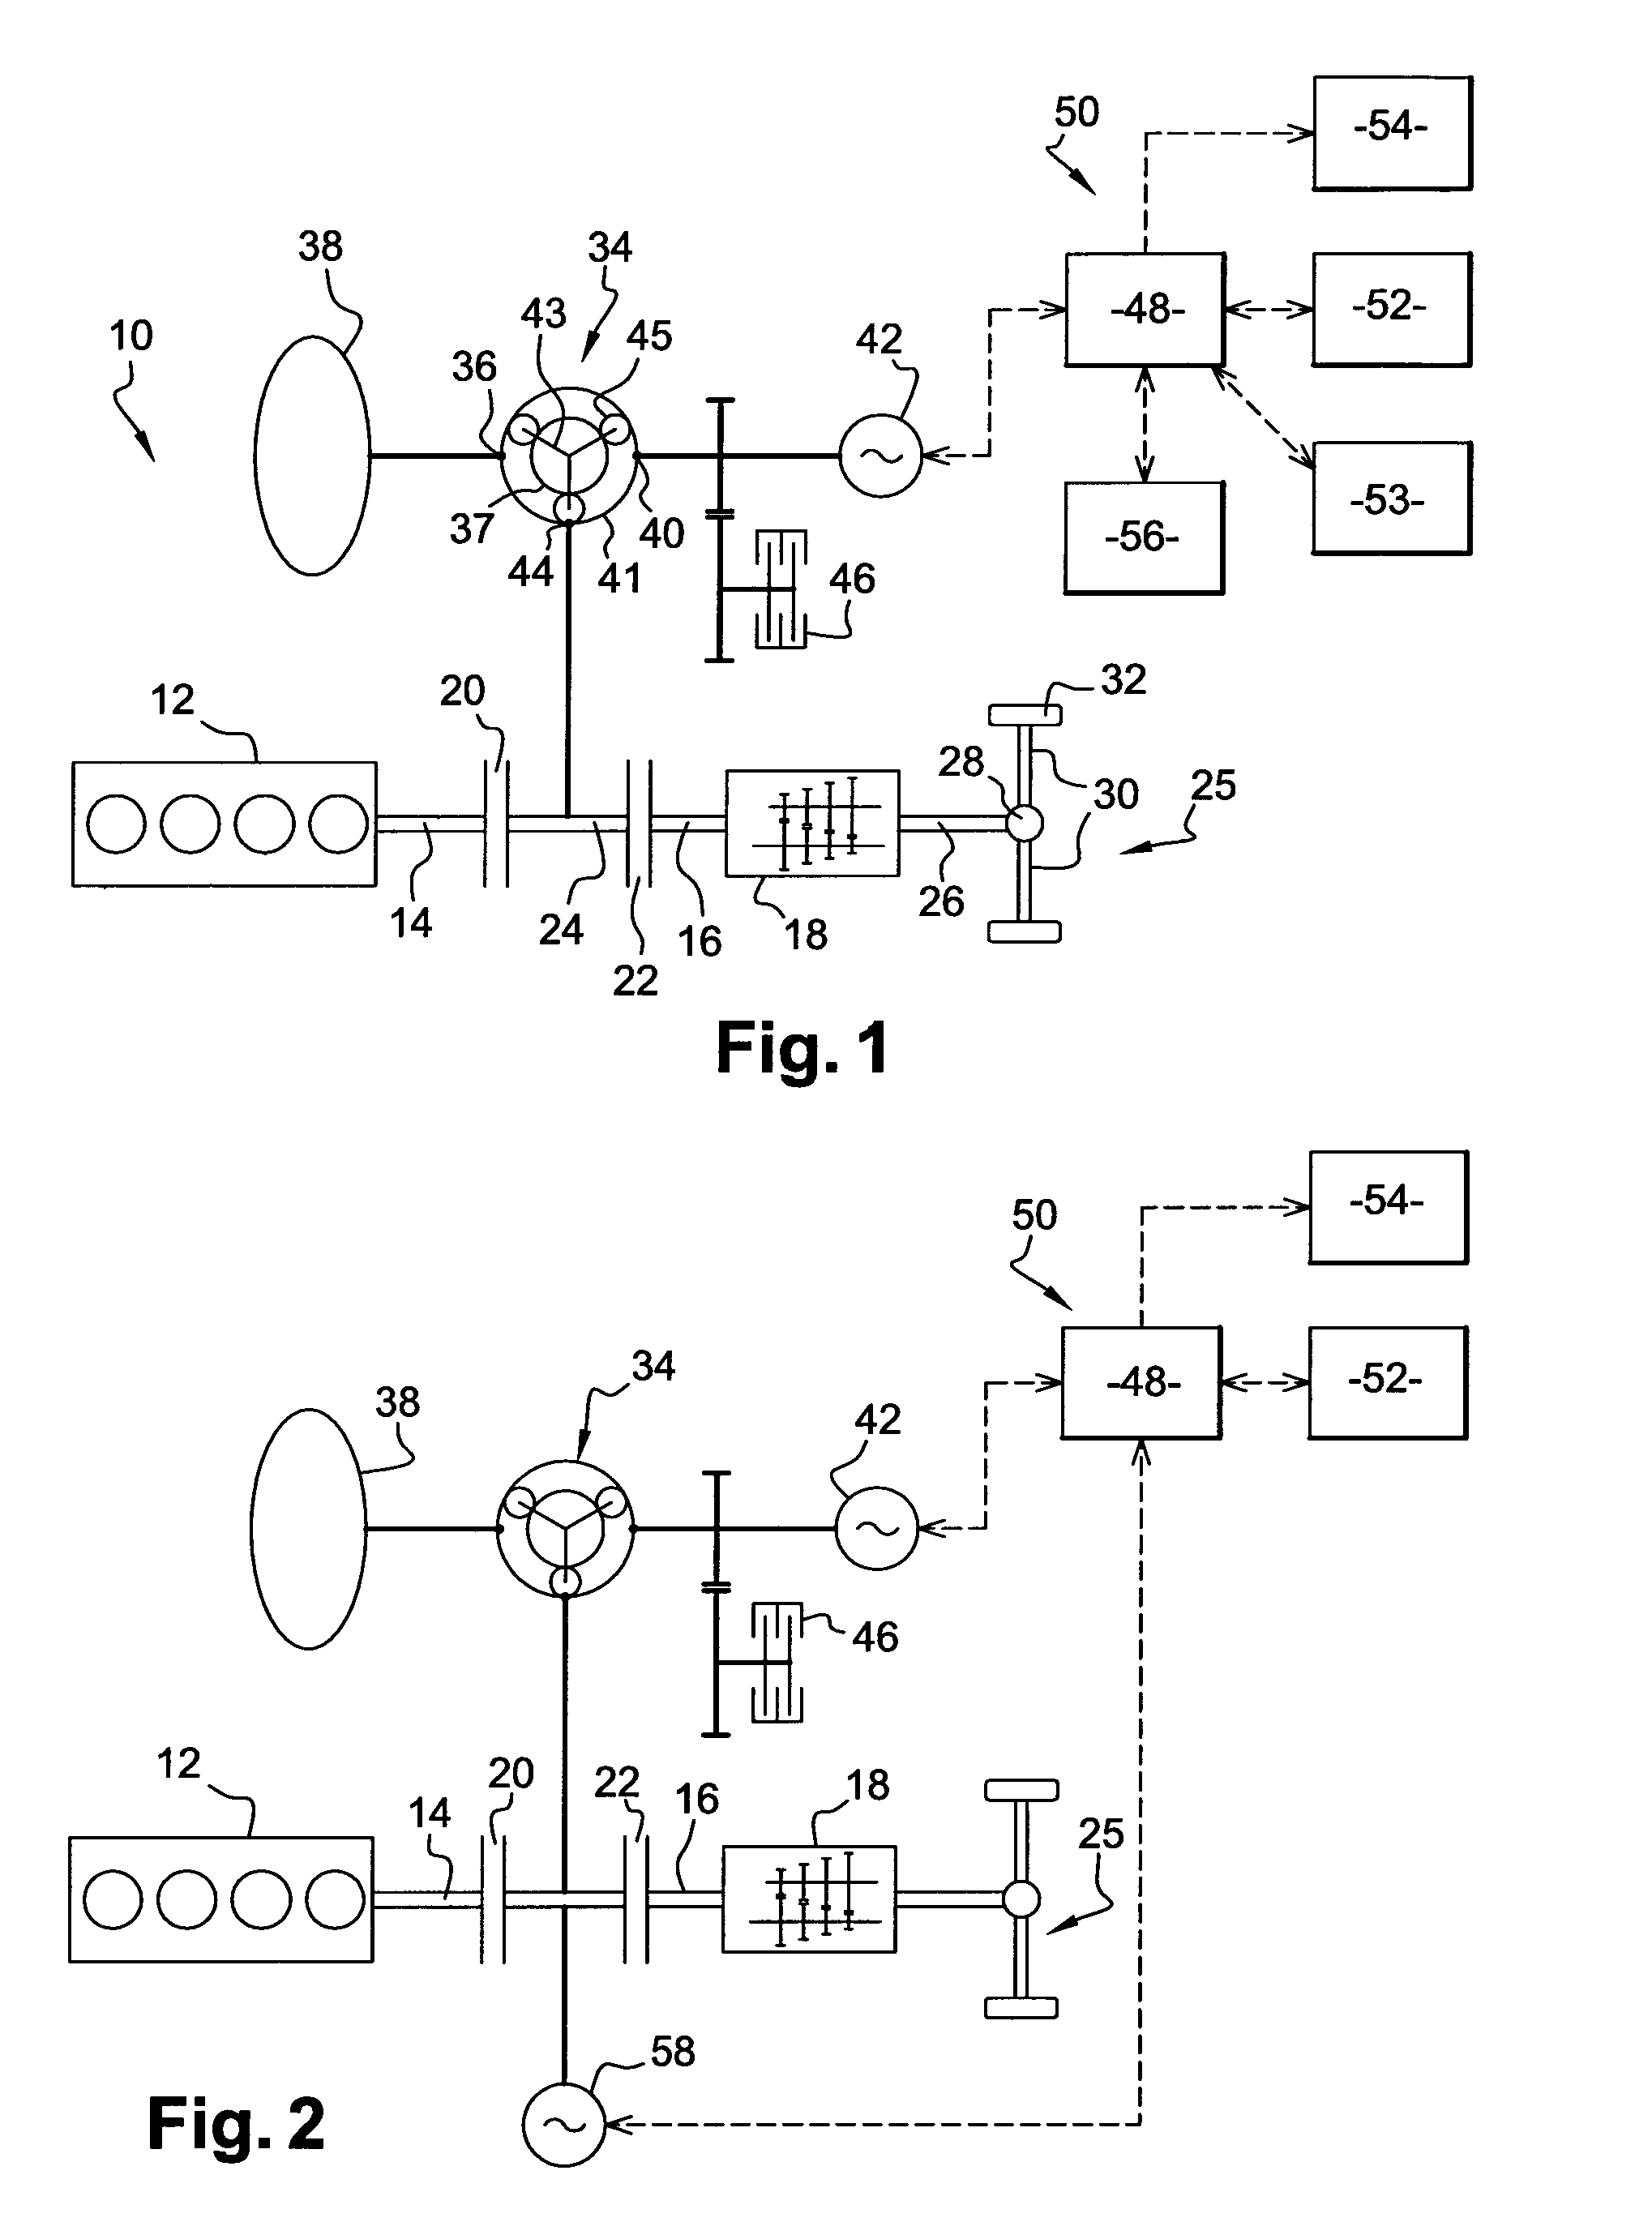 Powertrain comprising an optimized energy recovery system